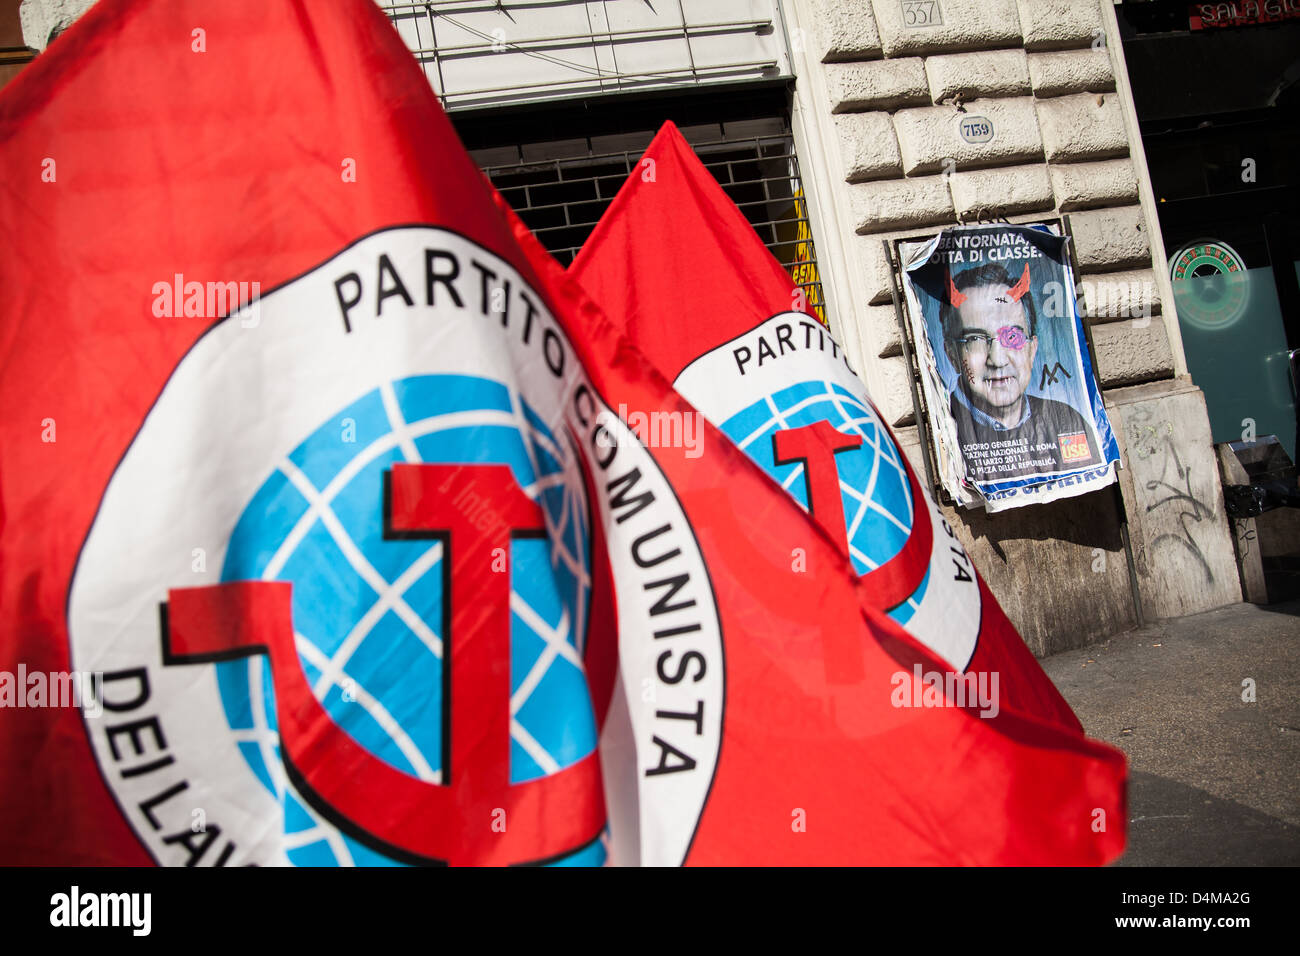 Two flag of the Italian Communist party during a general strike demonstration in Rome Stock Photo